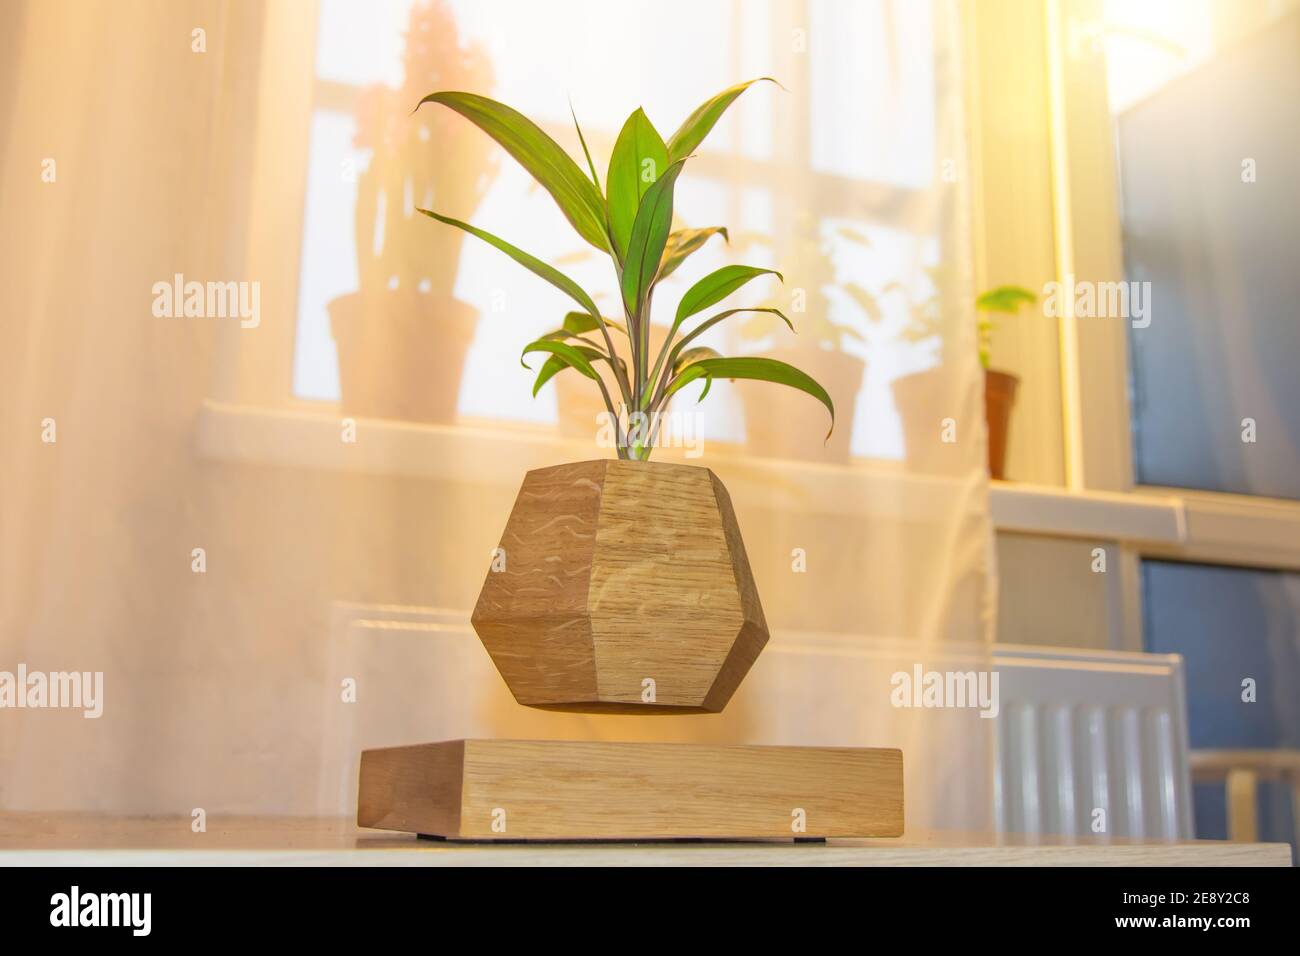 Hovering flying rotating in air potted plant pot on table in of window decorative gadget for home decoration Stock Photo - Alamy